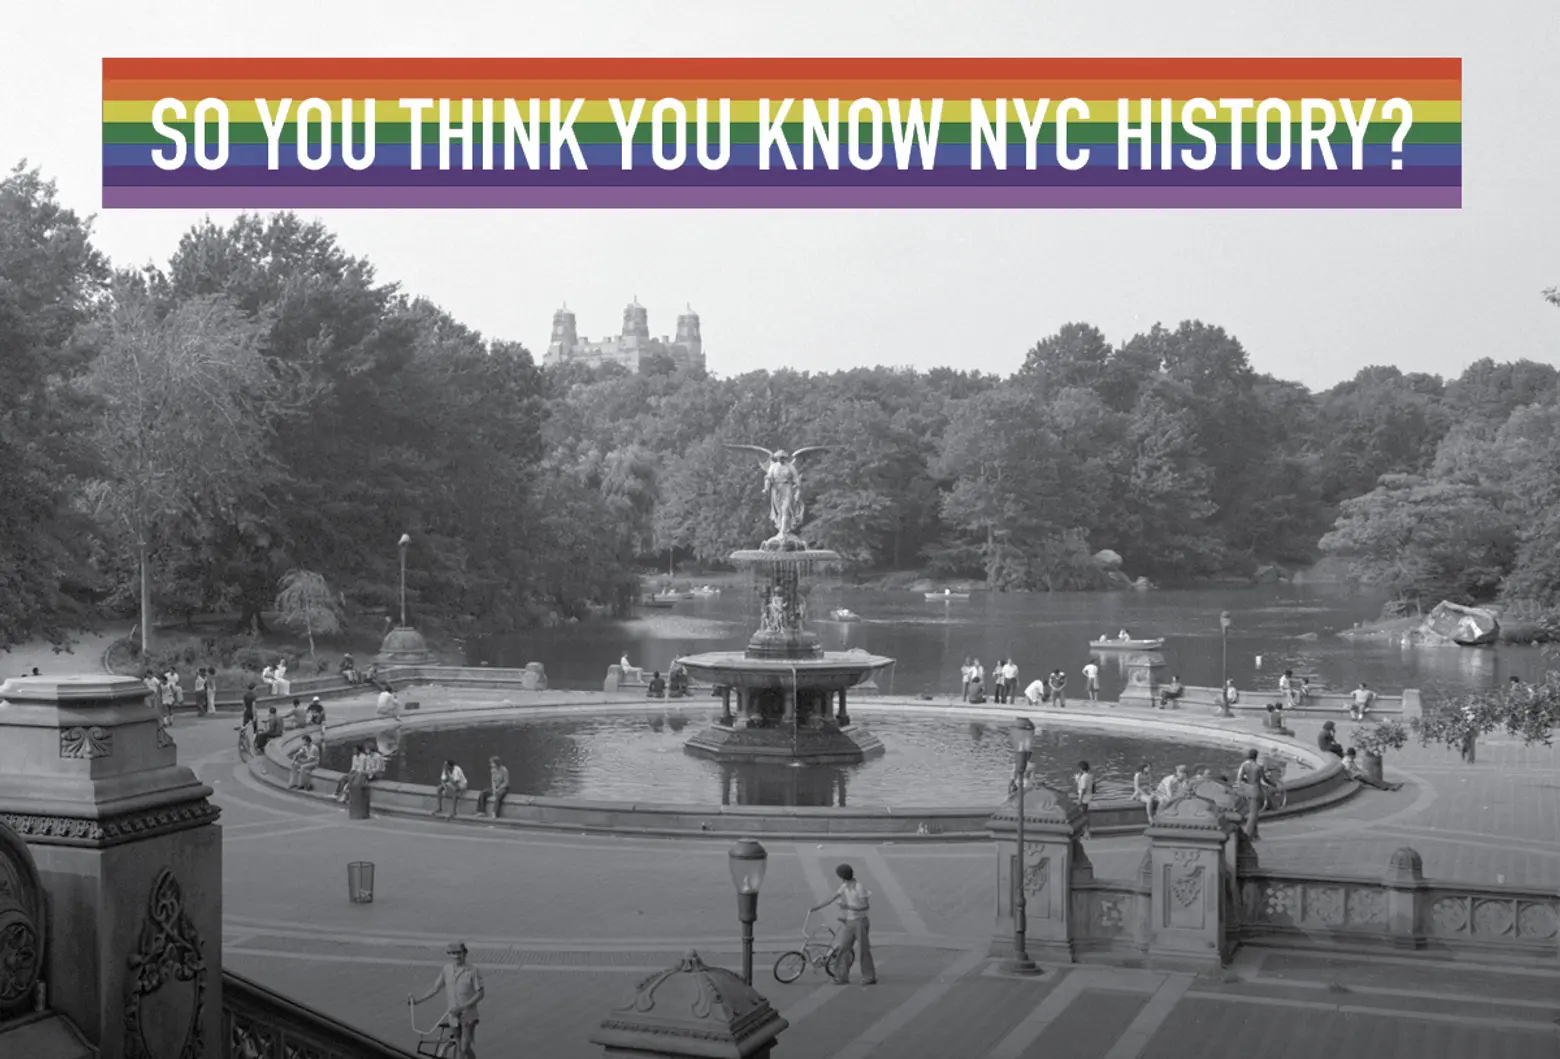 8 things you didn’t know about LGBT history in NYC